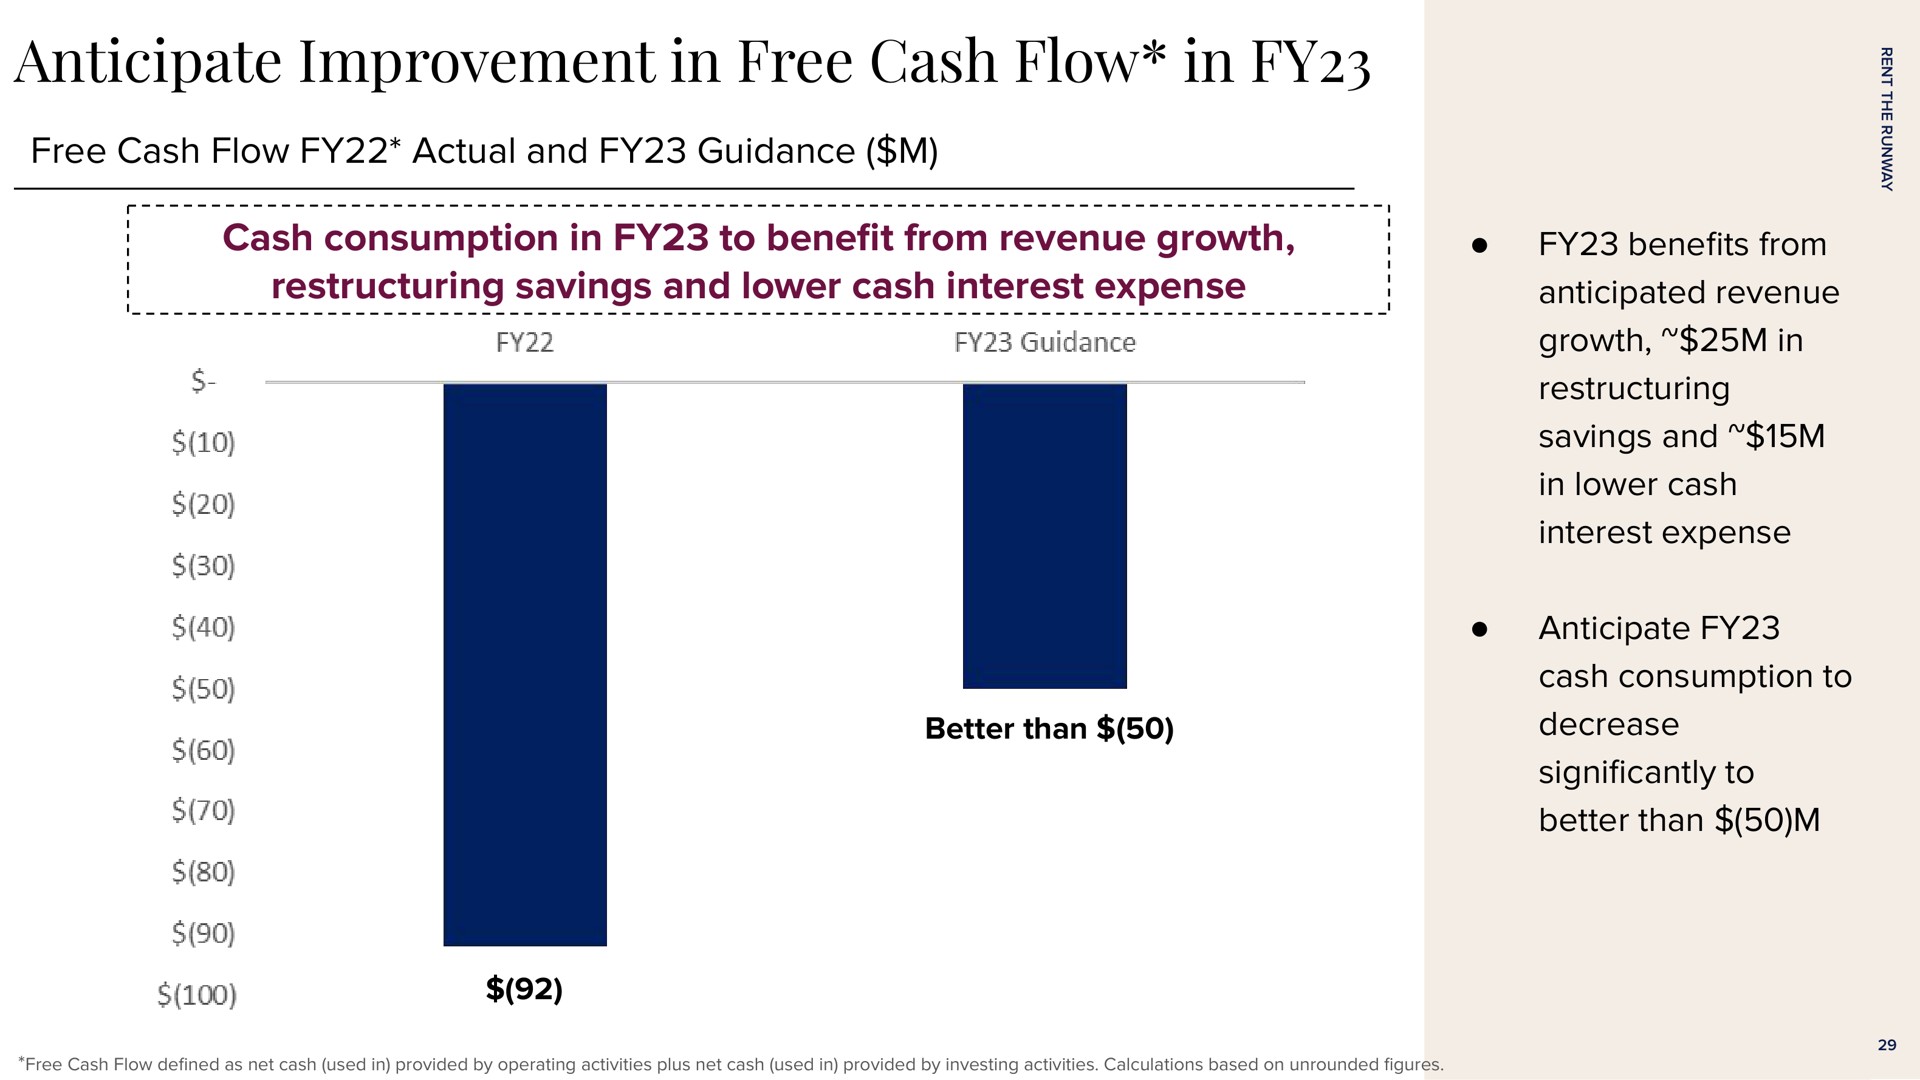 anticipate improvement in free cash flow in free cash flow actual and guidance cash consumption in to bene from revenue growth savings and lower cash interest expense bene from anticipated revenue growth in savings and in lower cash interest expense anticipate cash consumption to decrease to better than | Rent The Runway